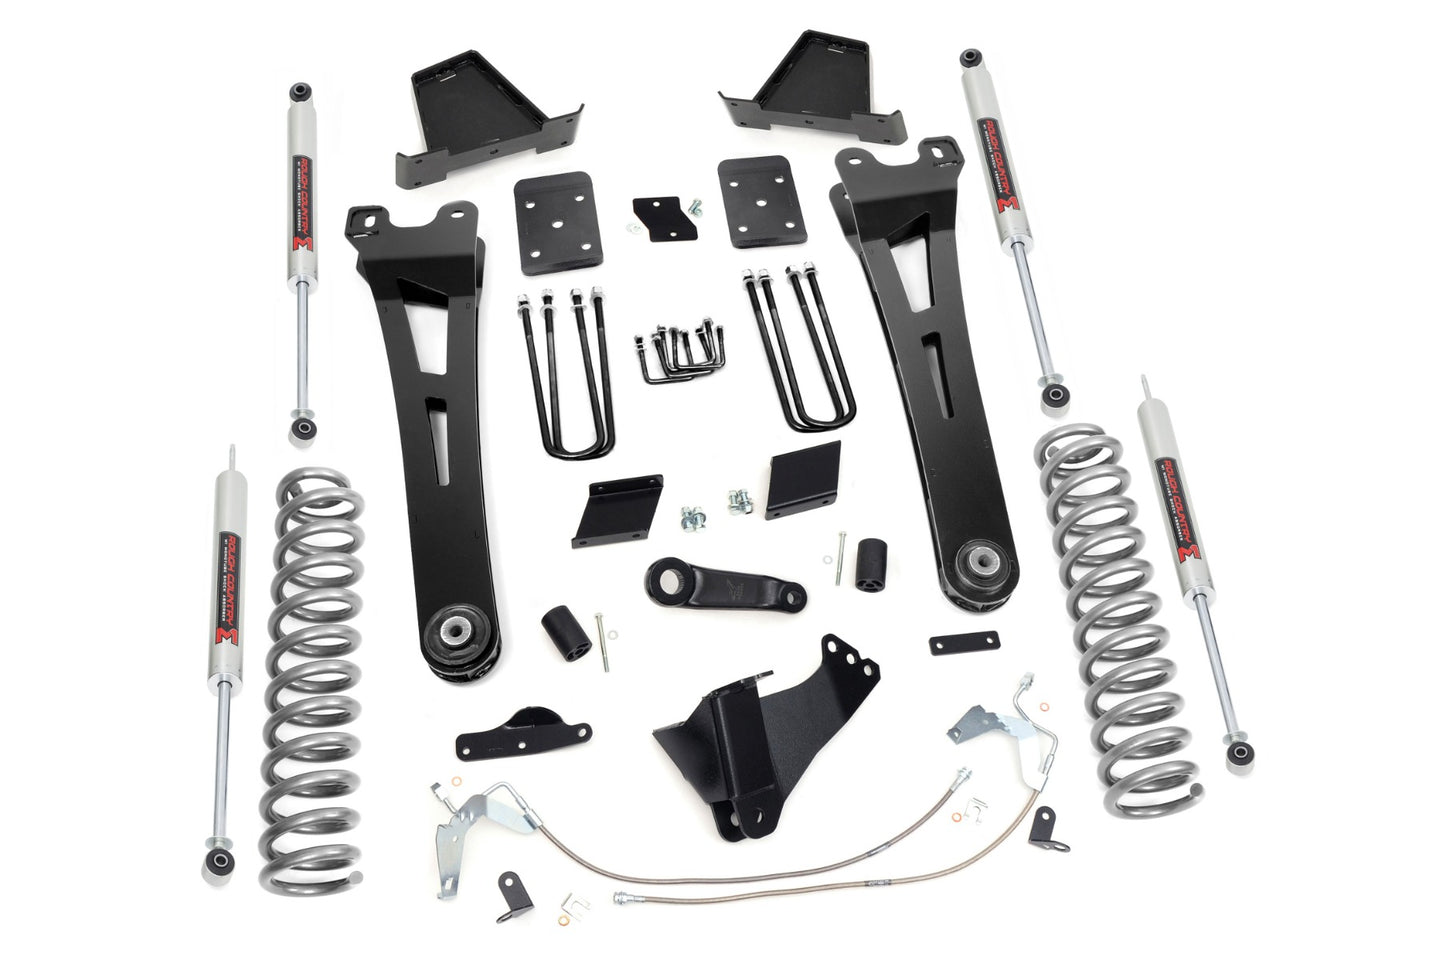 Rough Country (54140) 6 Inch Lift Kit | Diesel | Radius Arm | M1 | Ford F-250 Super Duty 4WD (11-14)